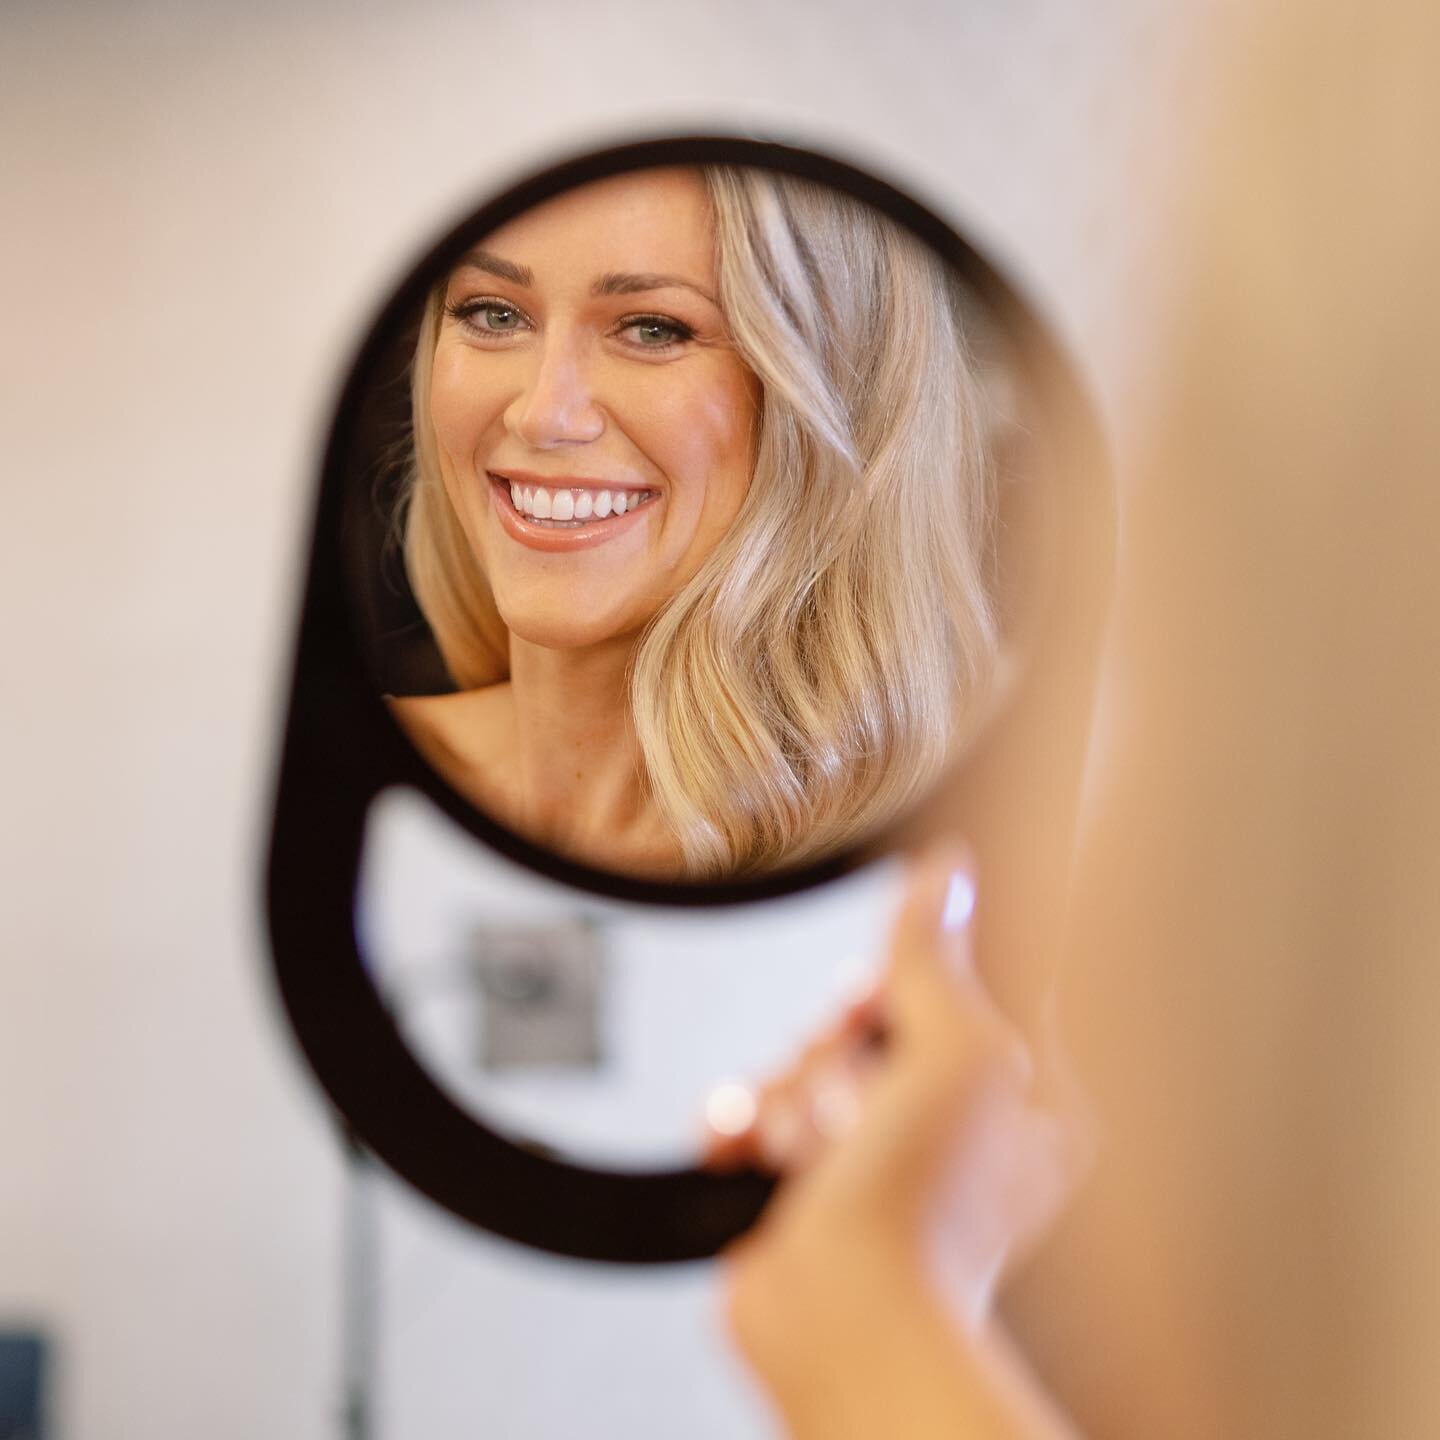 Molly&rsquo;s smile says it all when she finally got to see her first look in the mirror! 🪞👰🏼&zwj;♀️😄

Working with her to create this sophisticated and minimalistic look was such a dream experience for us. She trusted us and our expertise throug